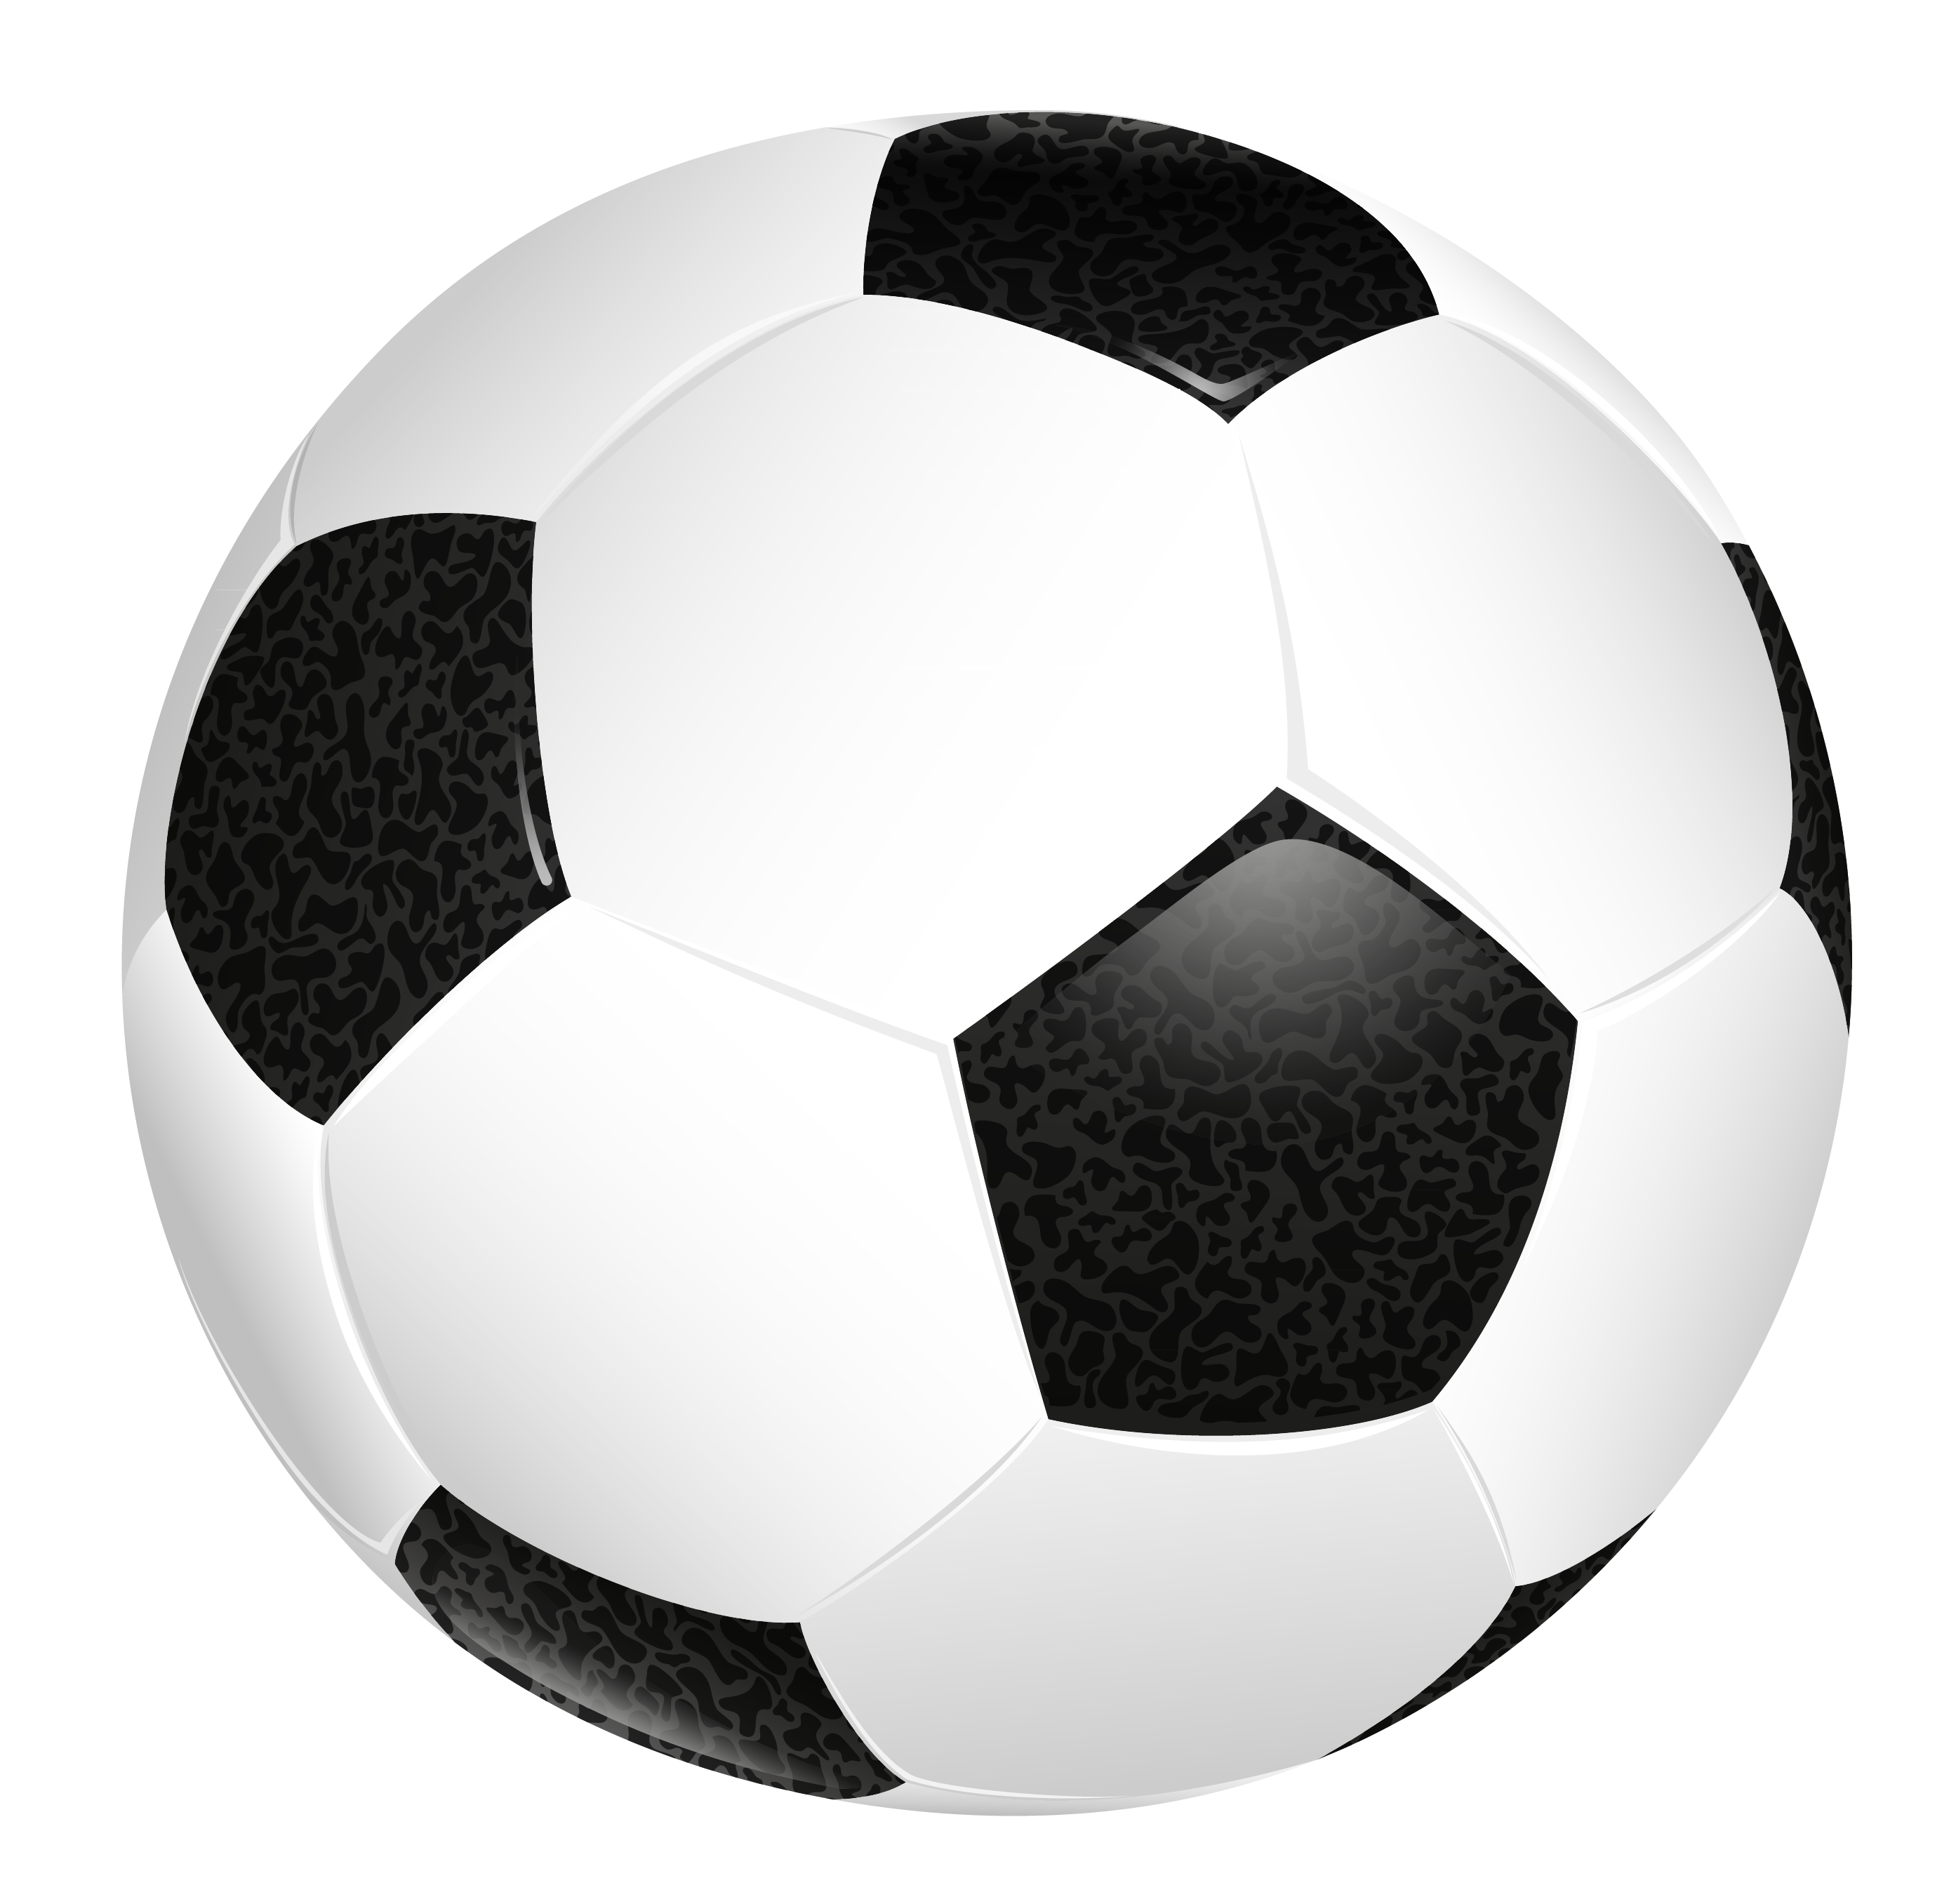 Png images. Clipart football foot ball